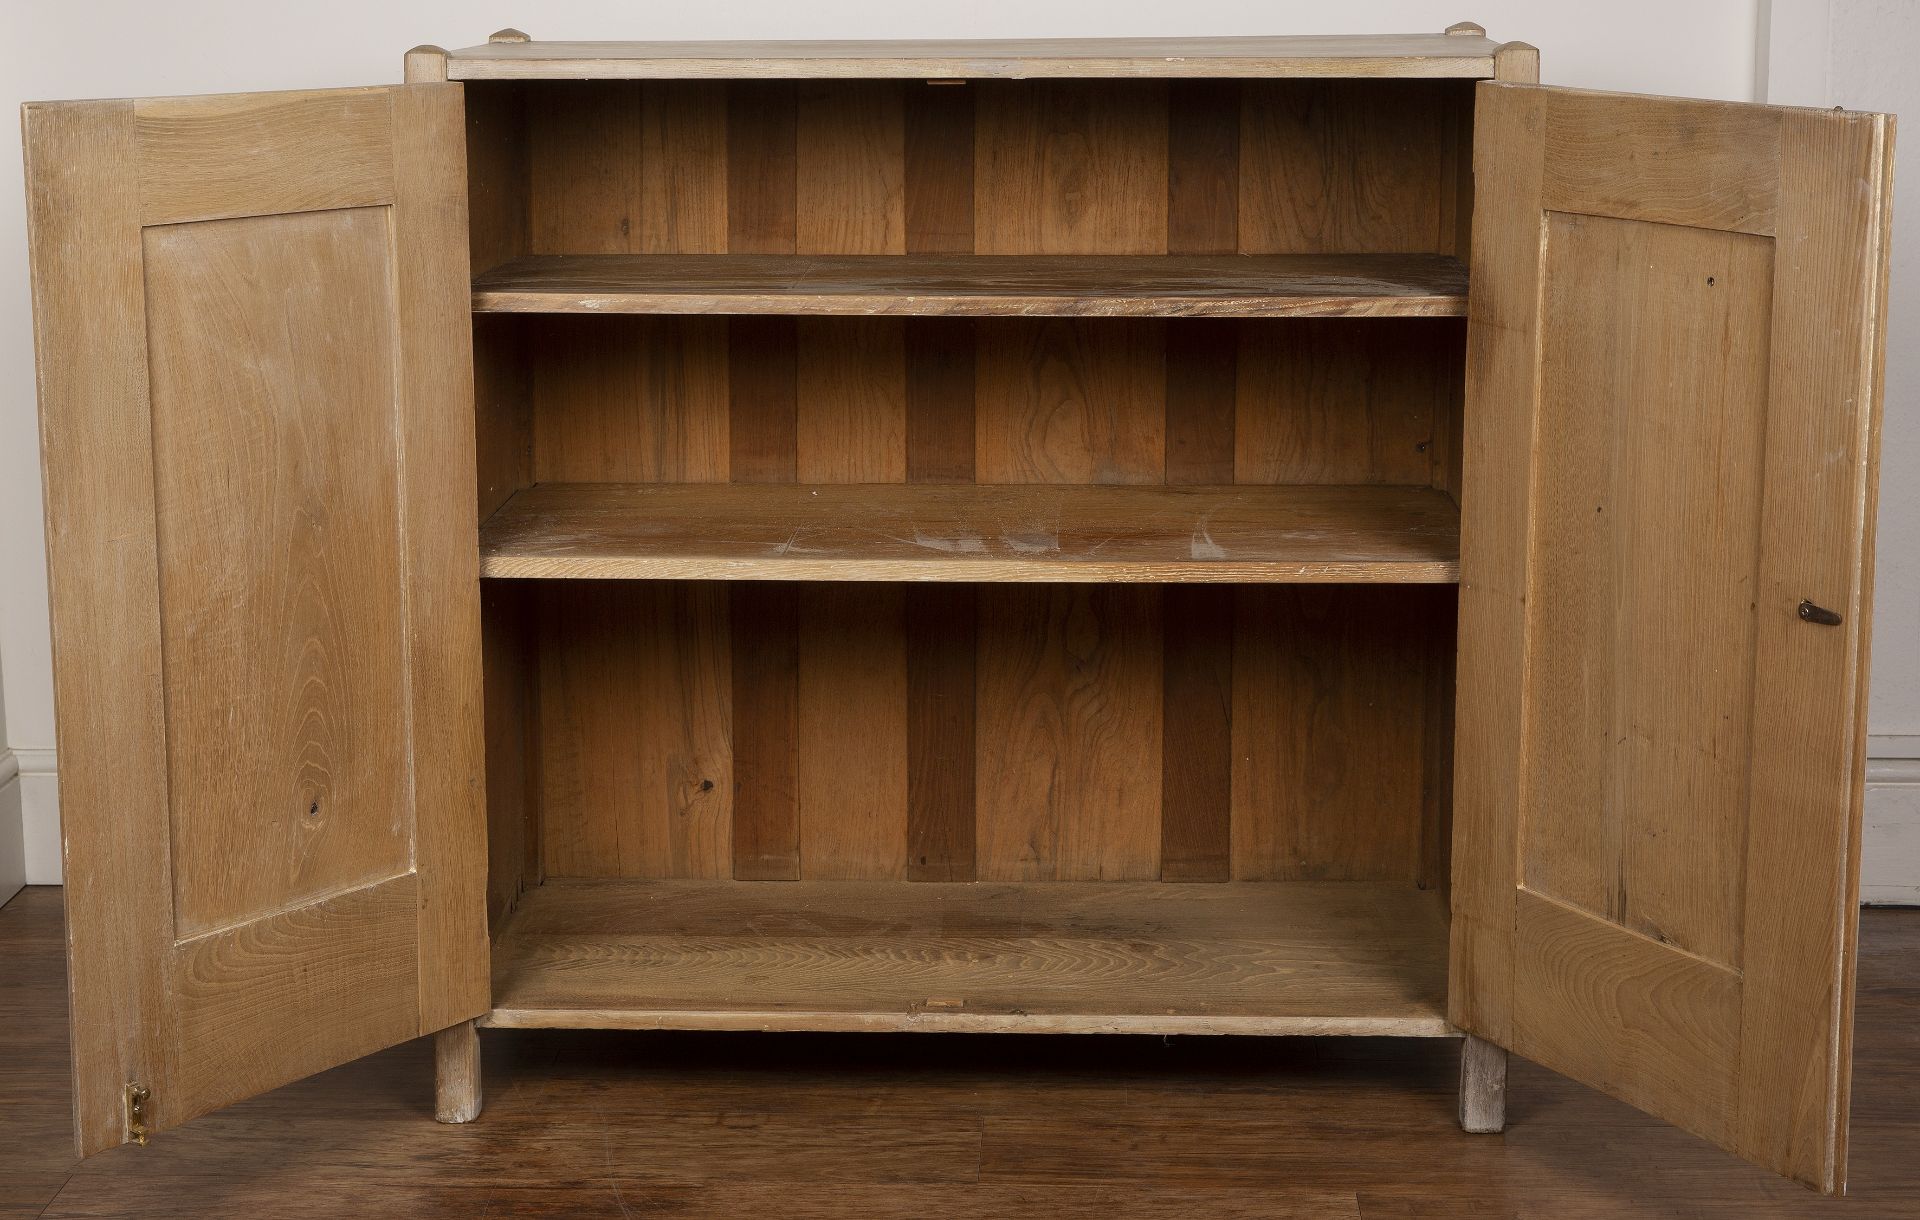 Heals cupboard limed oak, design number '348', with two panelled doors enclosing shelves, raised - Image 2 of 5